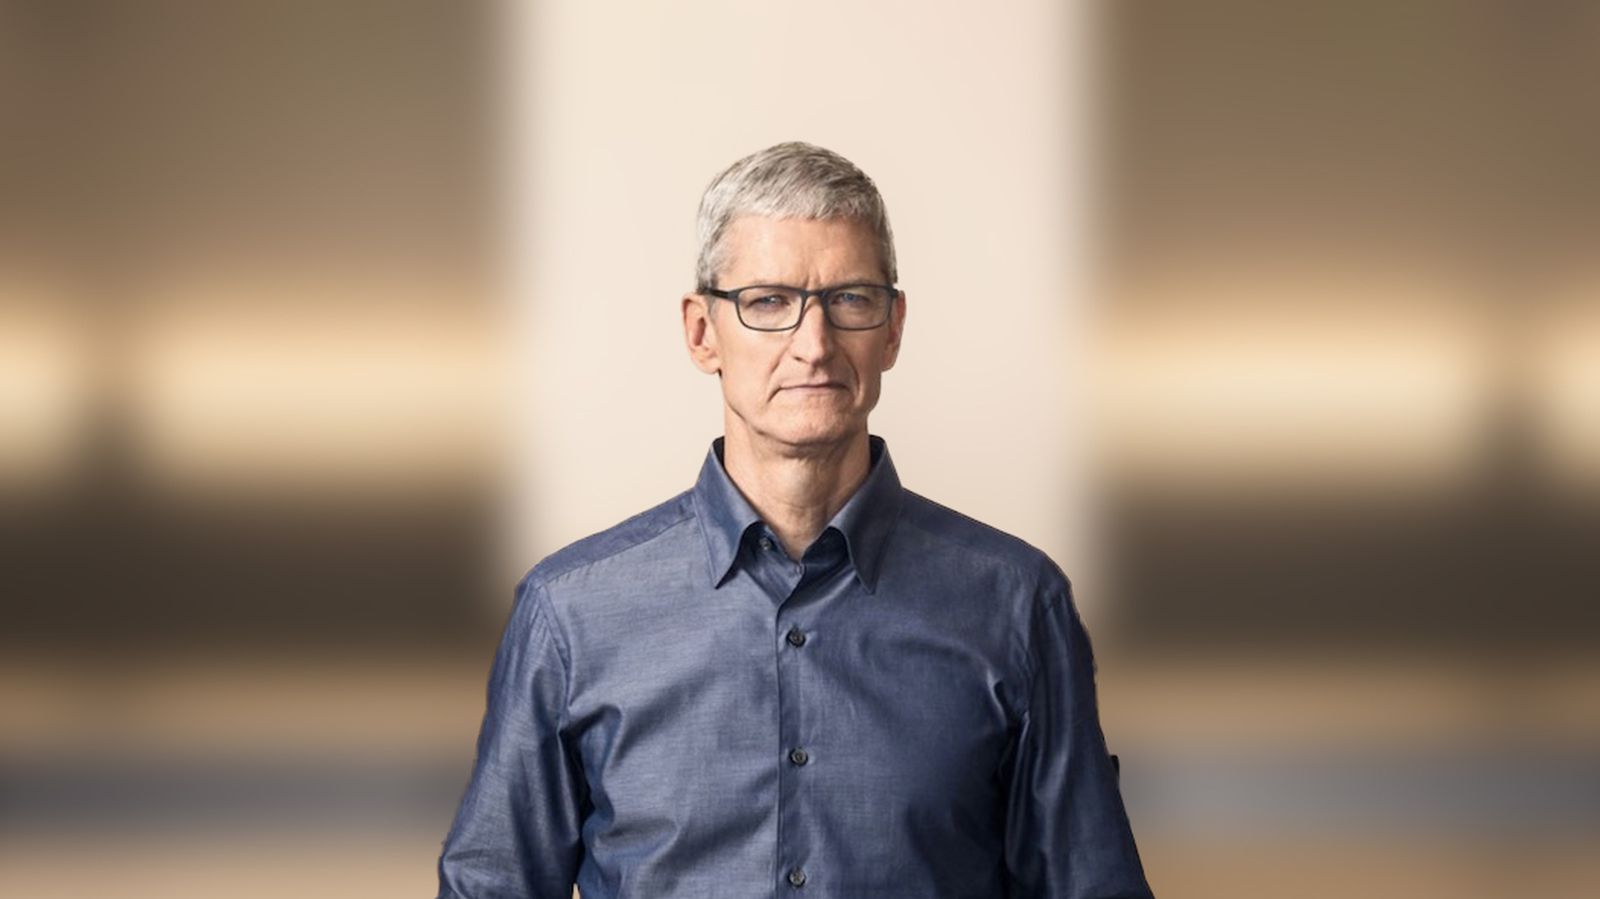 Apple CEO Tim Cook Teases AR/VR Headset and More in New Interview - macrumors.com